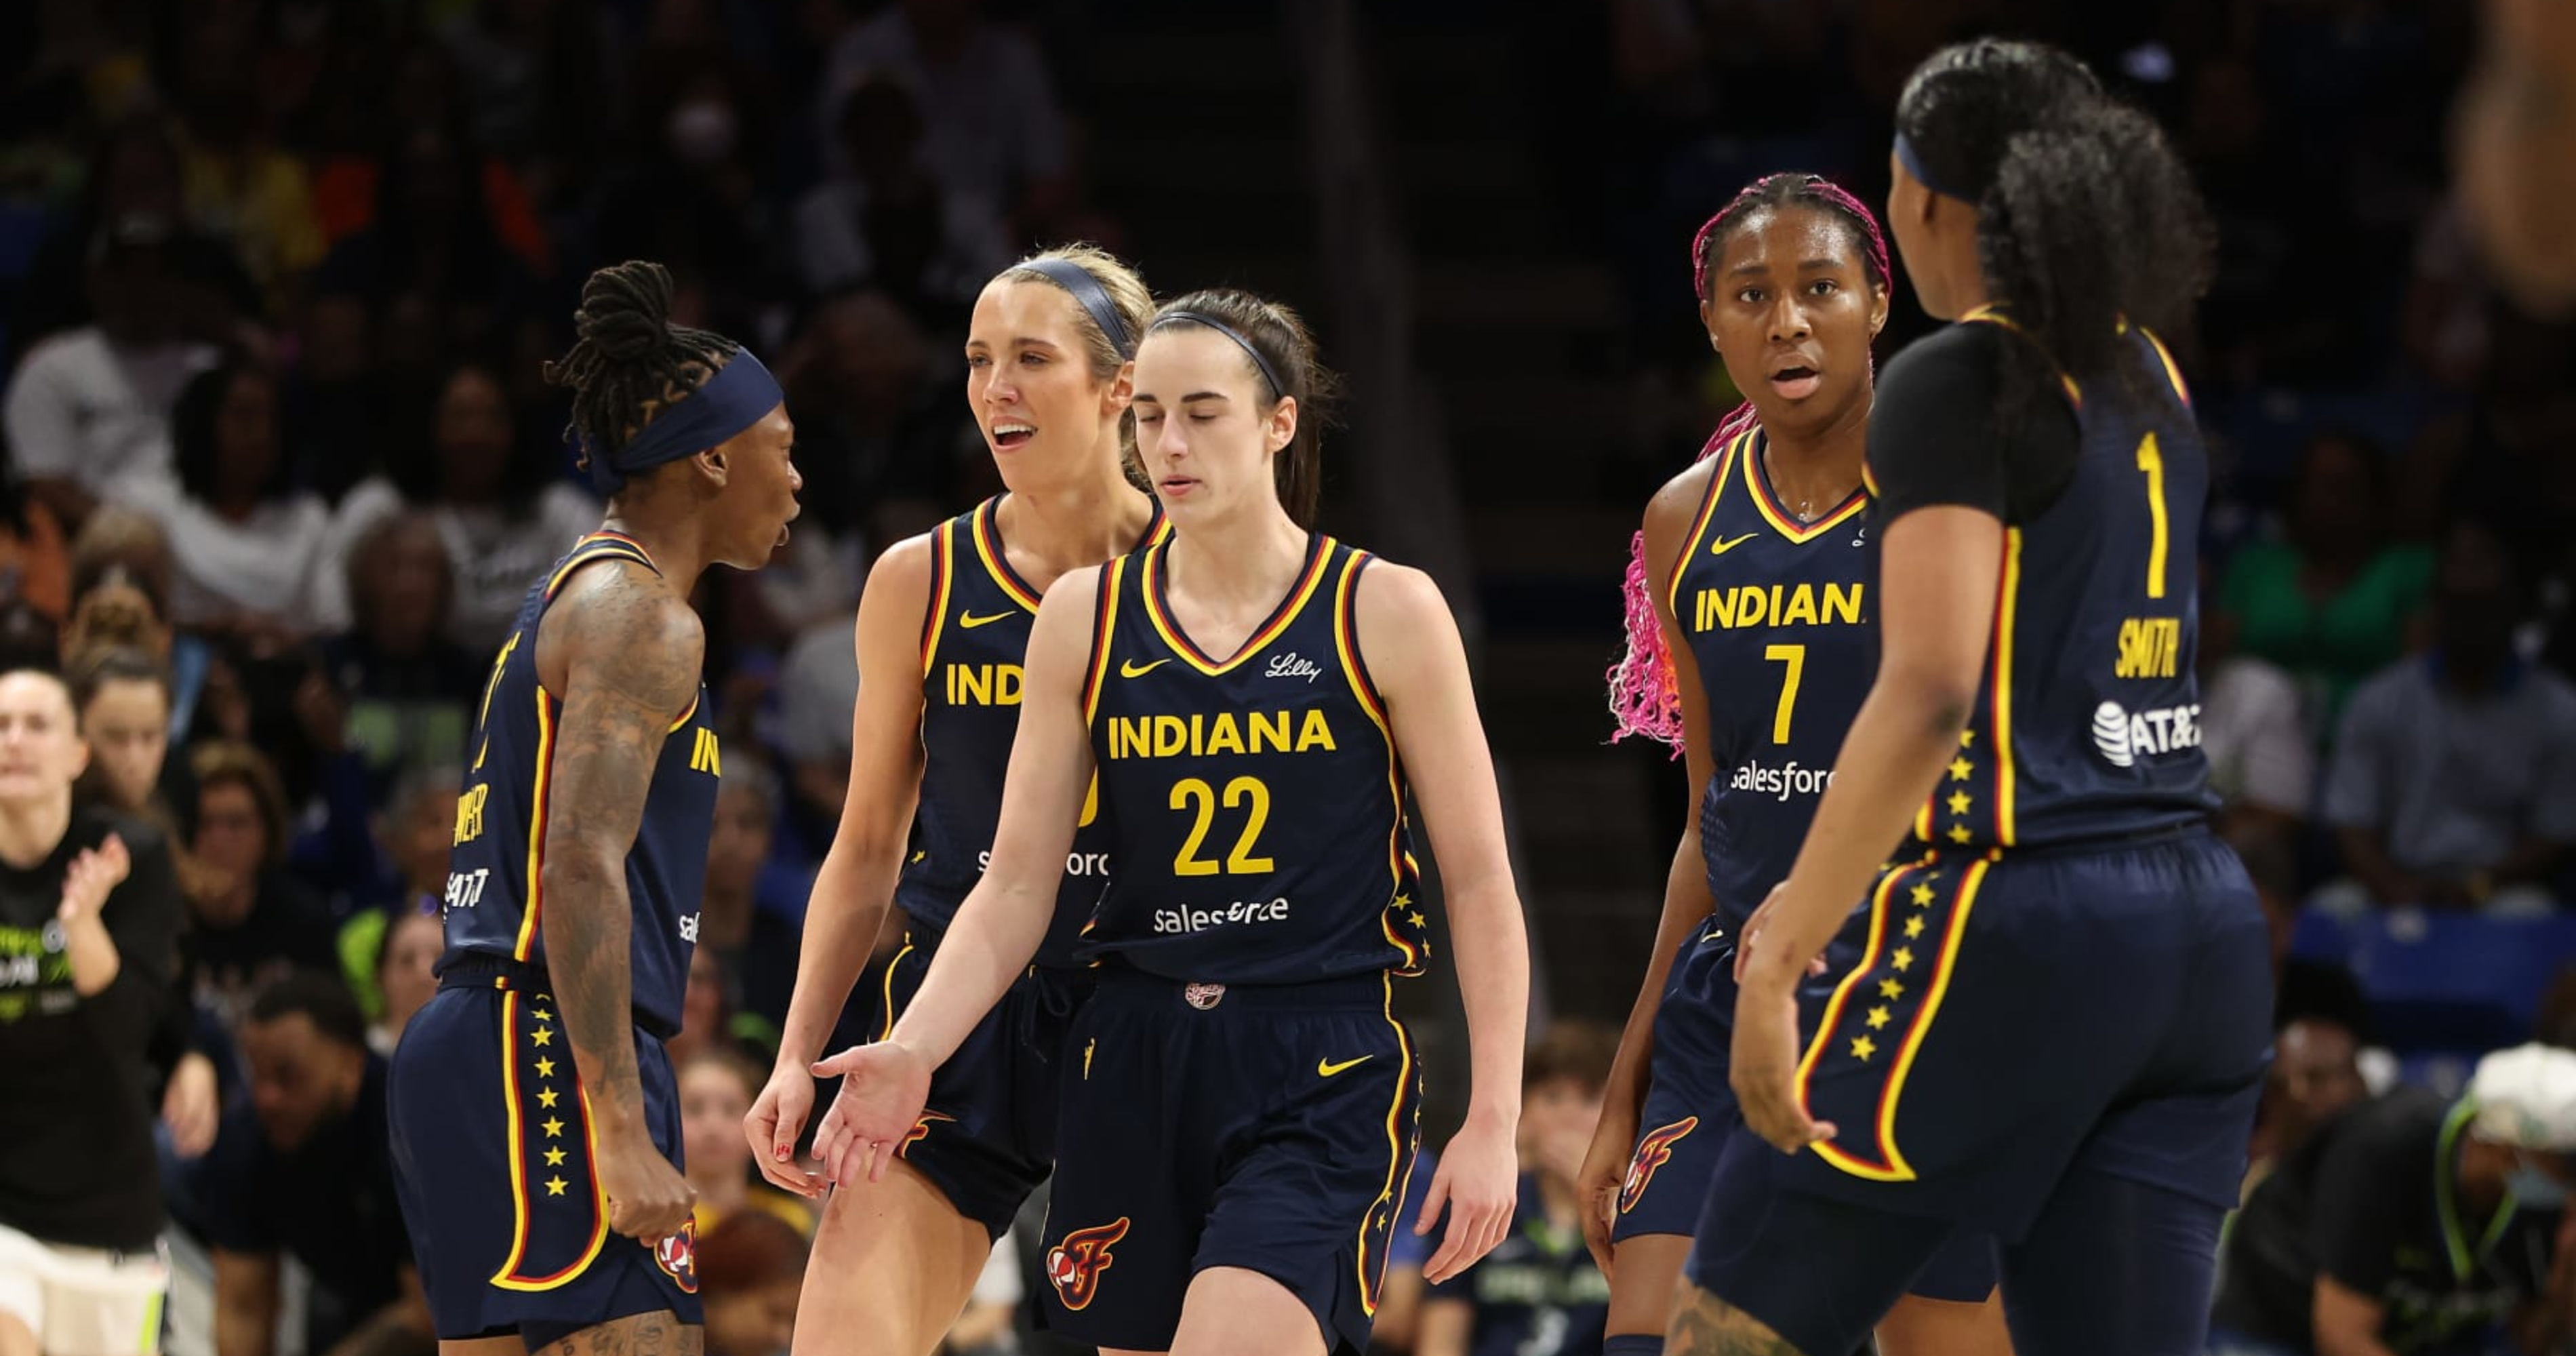 Caitlin Clark 'Thankful' for WNBA Starting Charter Flights: 'Makes Life a Lot Easier'